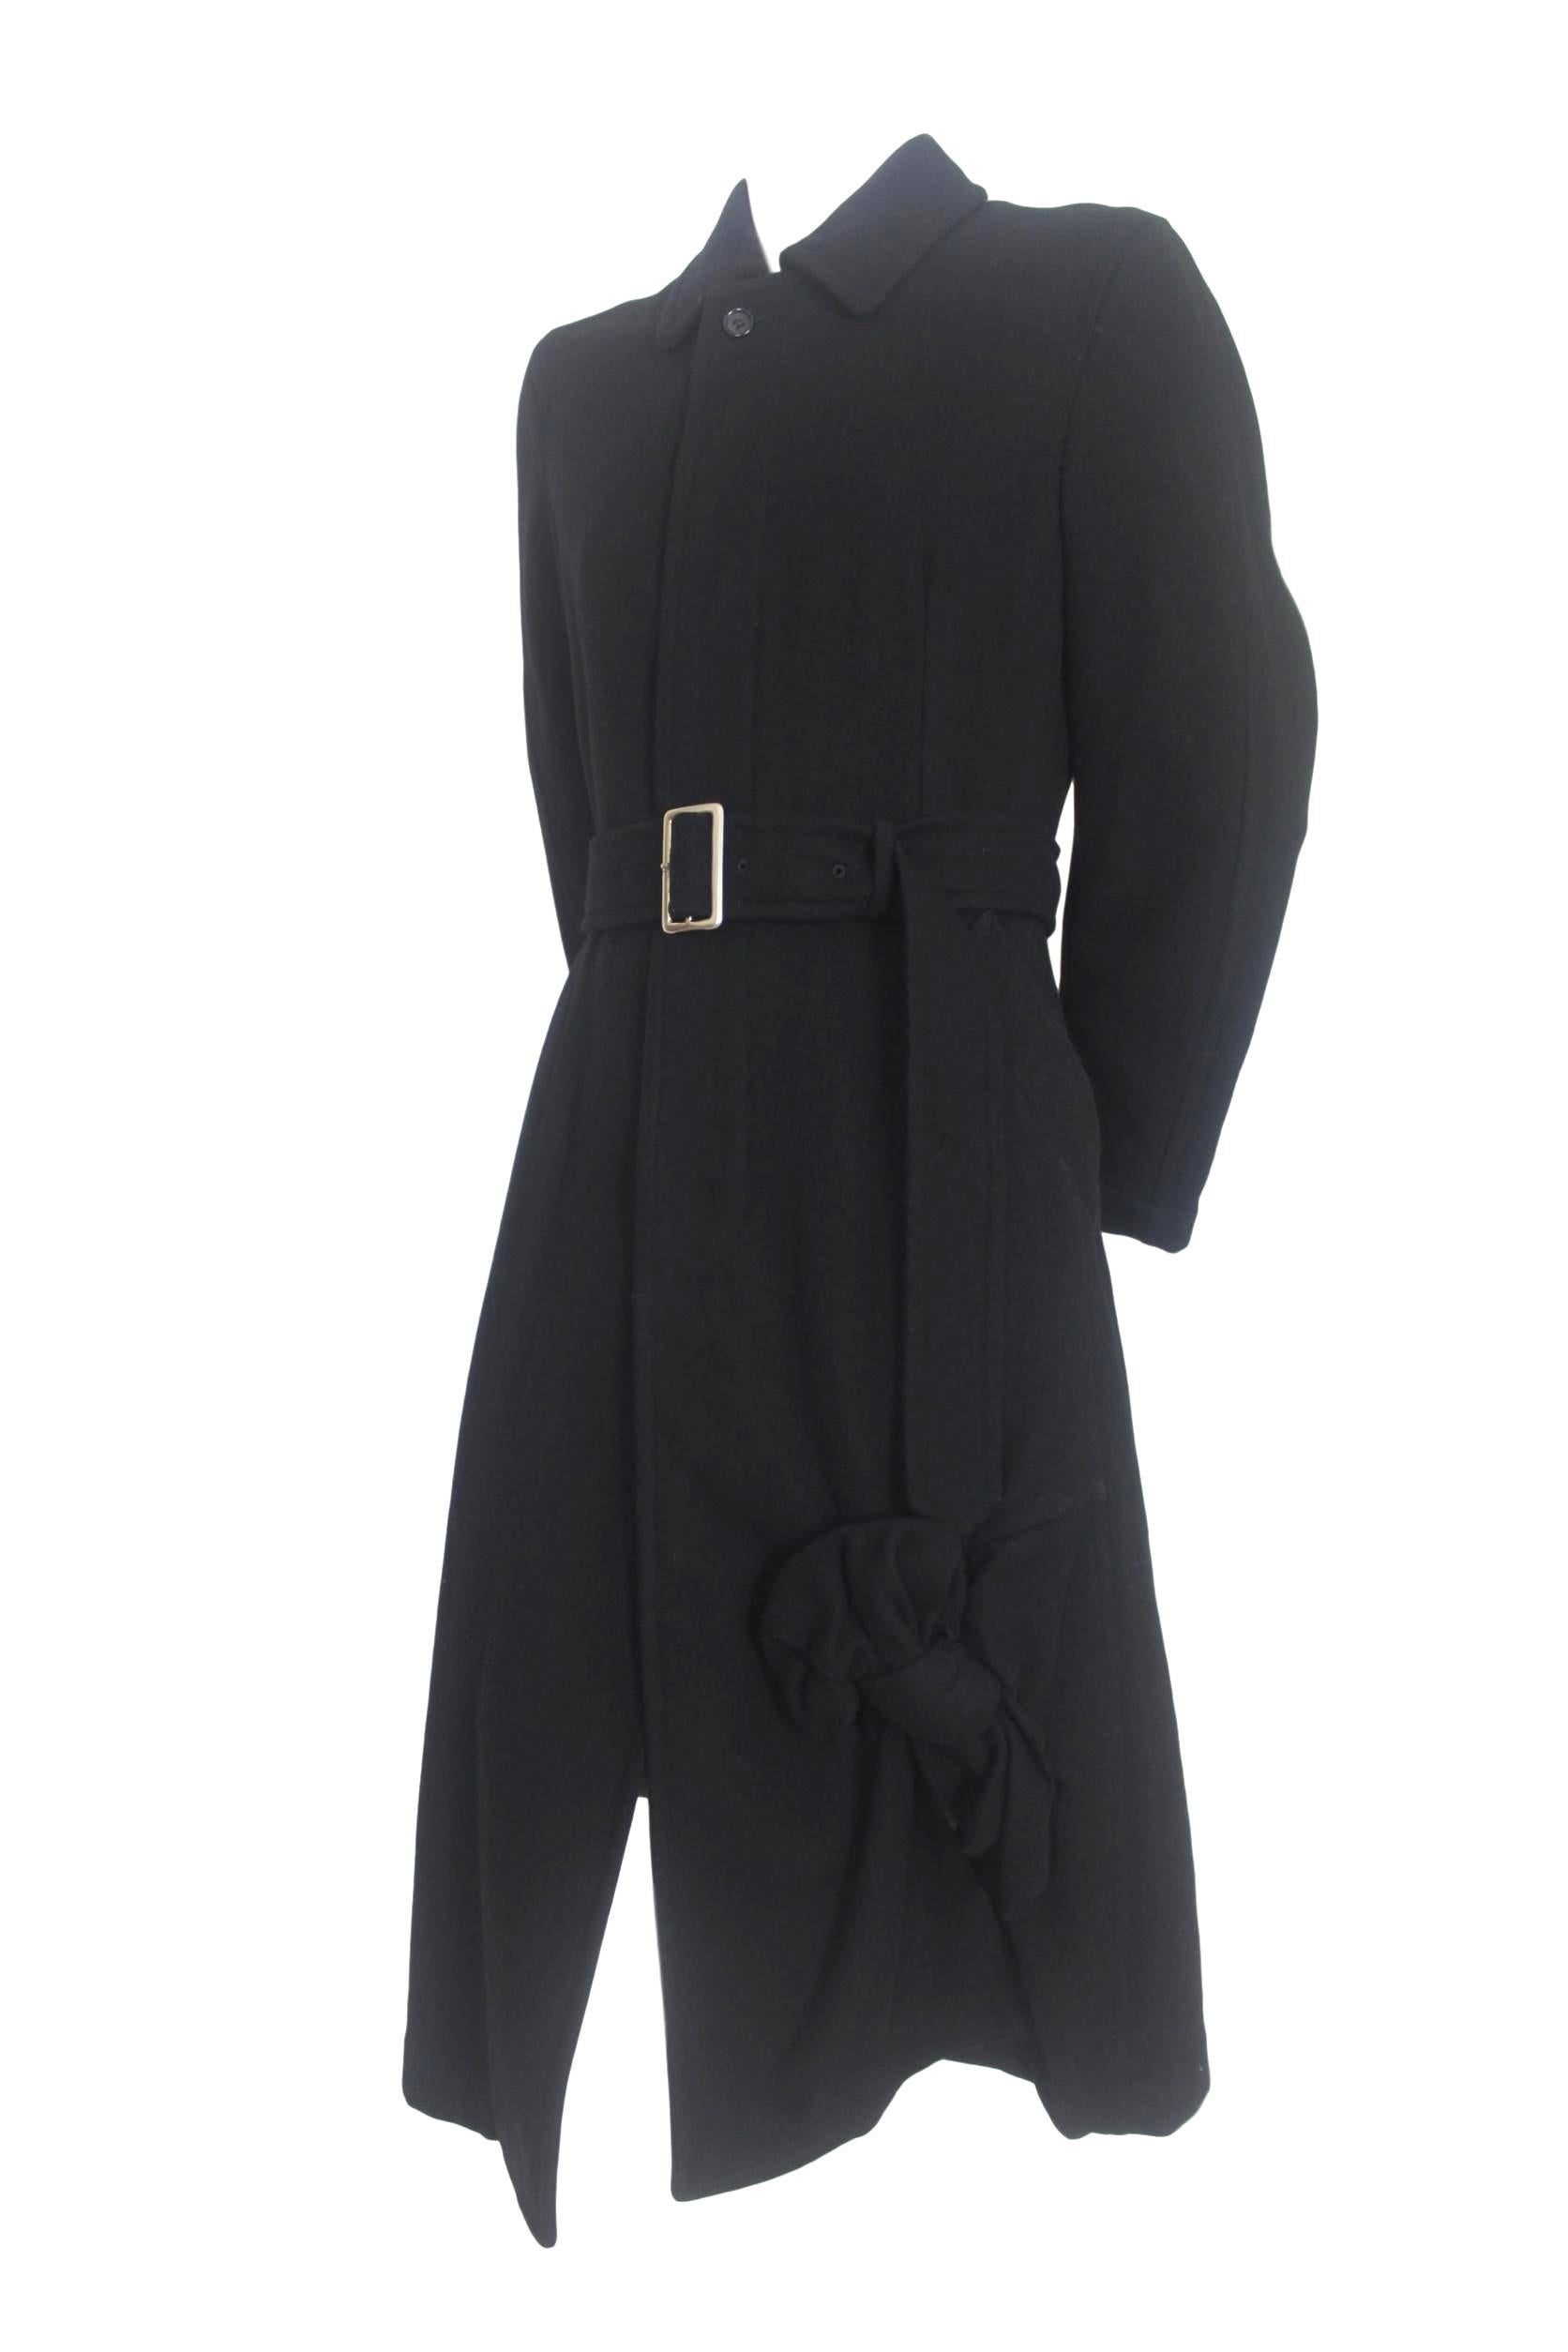 Women's Comme des Garcons 2006 Collection Wool Coat with Bow Decoration For Sale